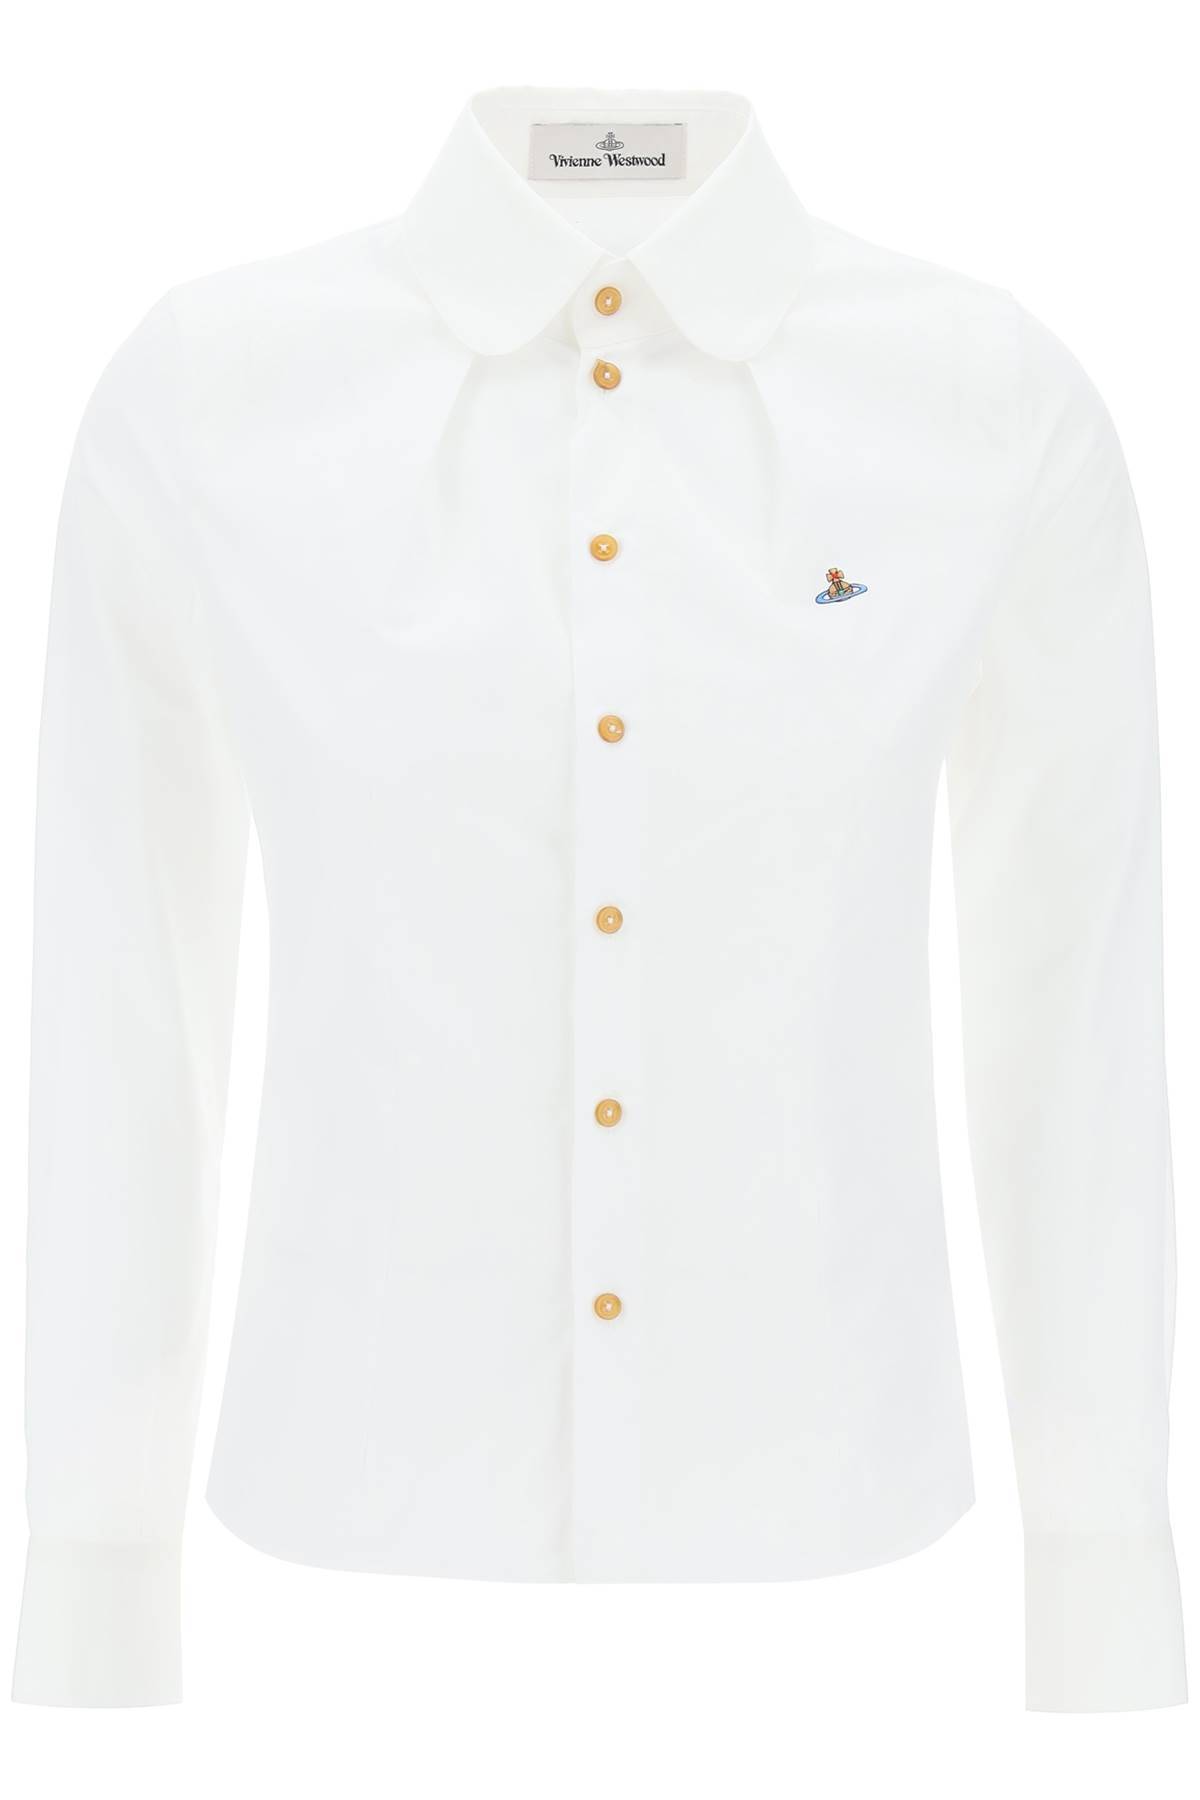 Vivienne Westwood VIVIENNE WESTWOOD toulouse shirt with darts